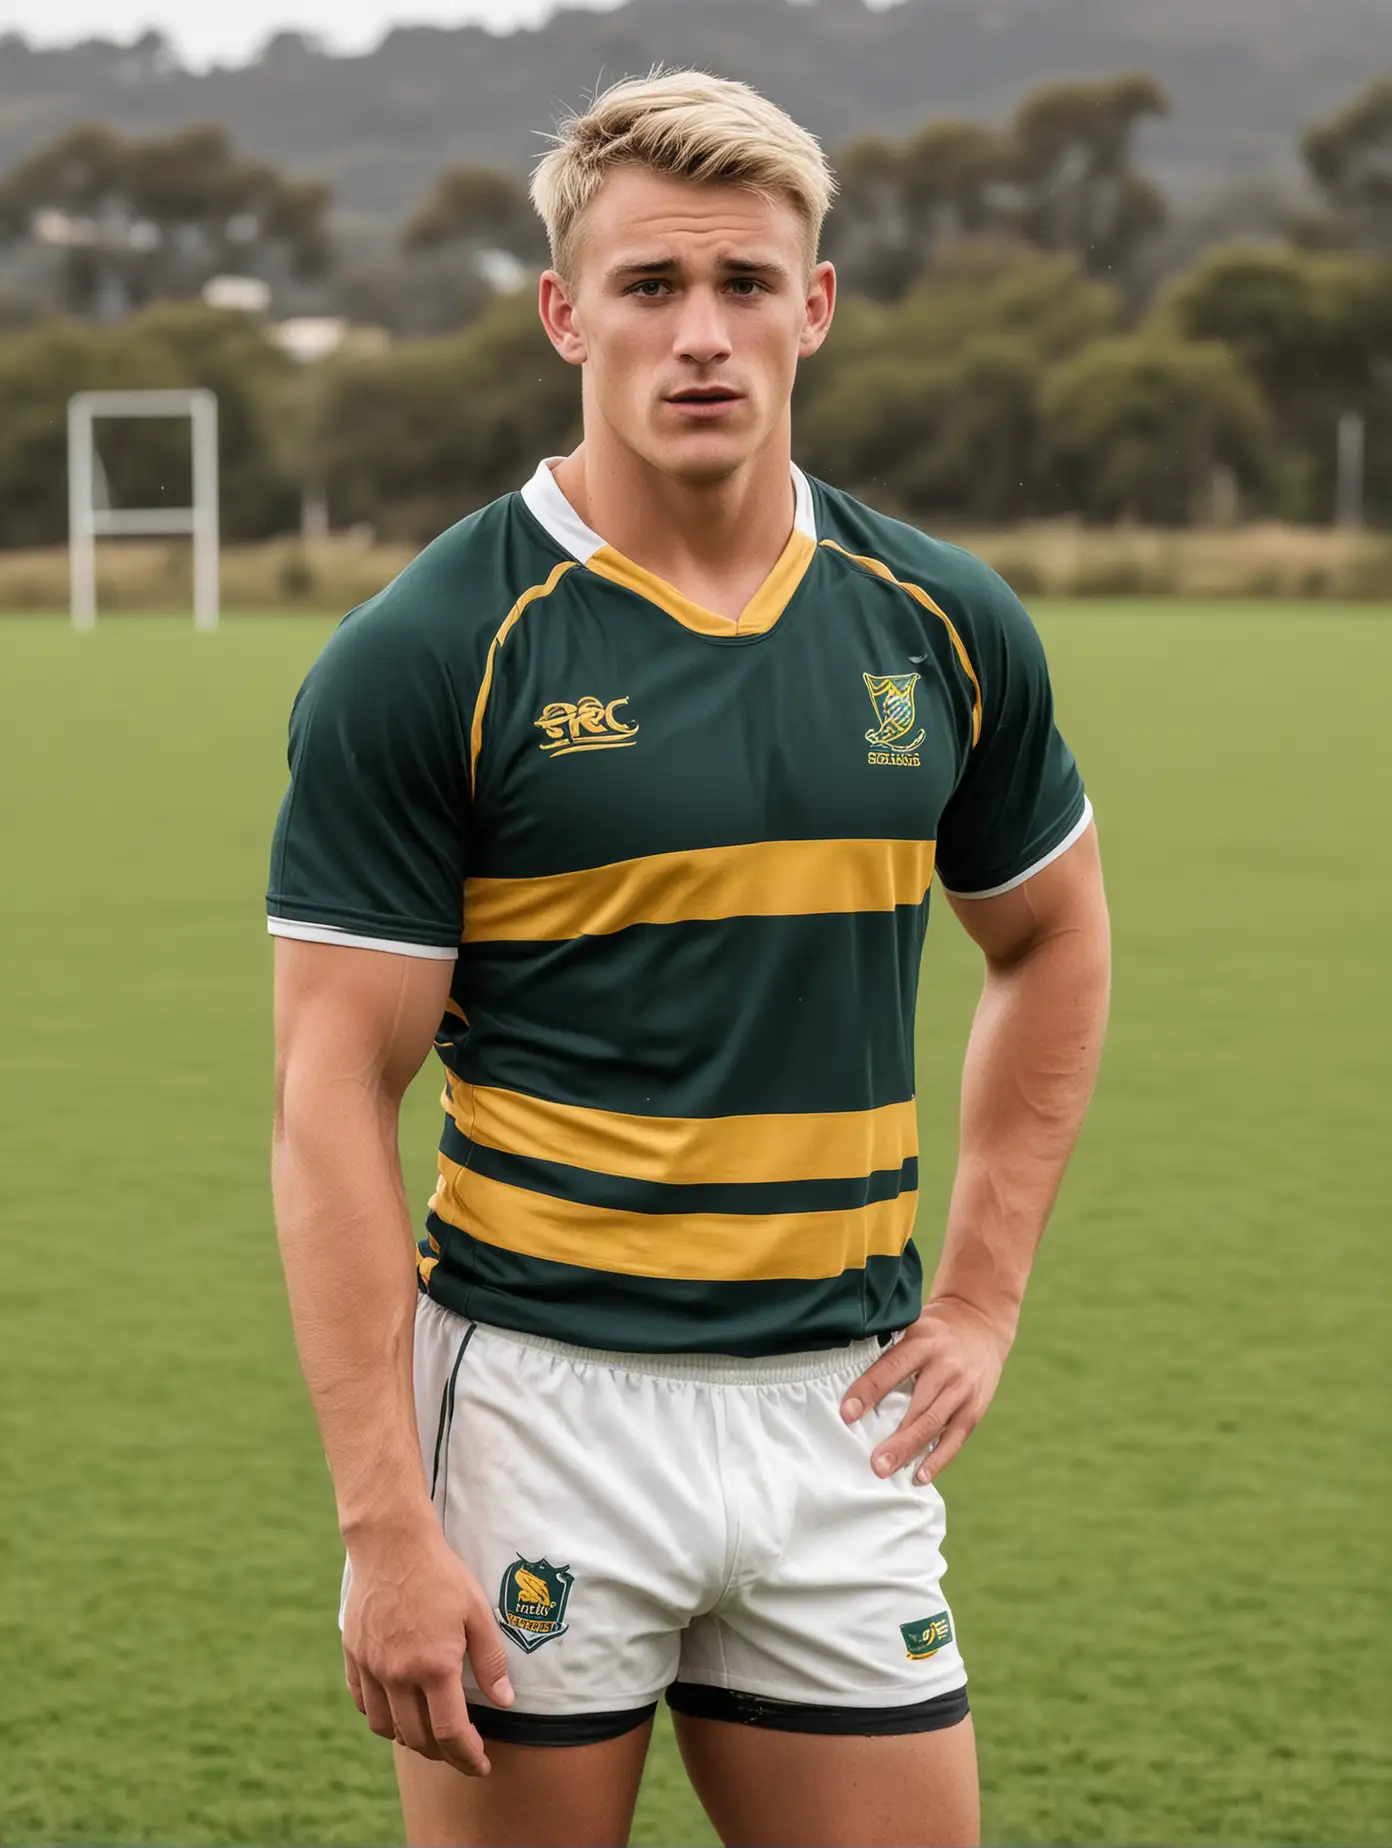 collegiate rugby player, athlete, short black hair, blond highlights, Australian, rugby jersey, rugby shorts, sweaty, young adult, standing, rugby pitch background